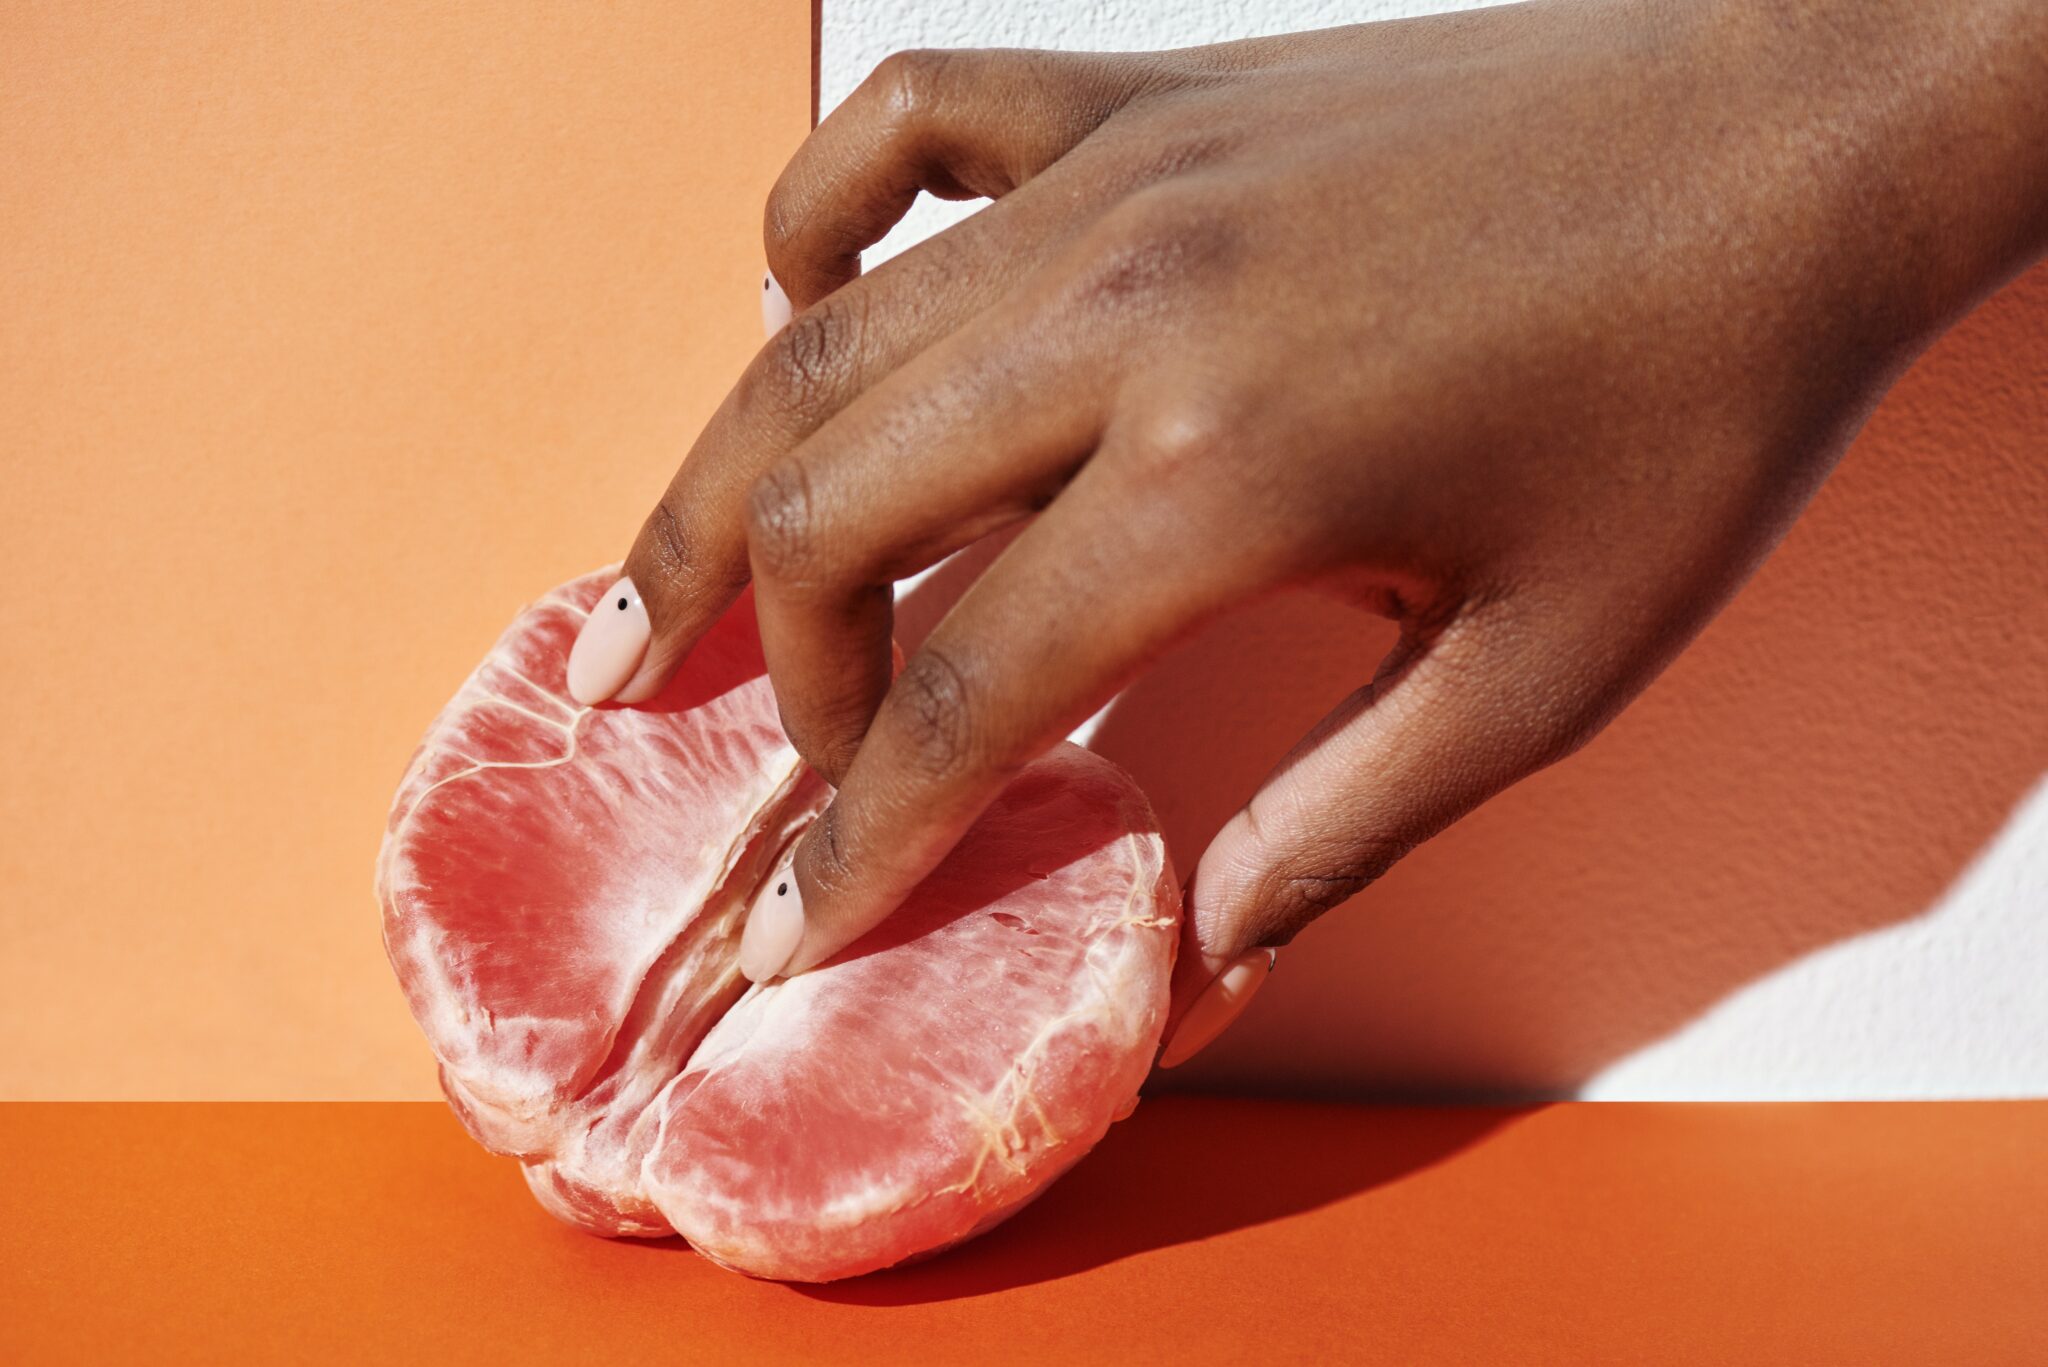 A woman's hand fingering the middle of a sliced orange.